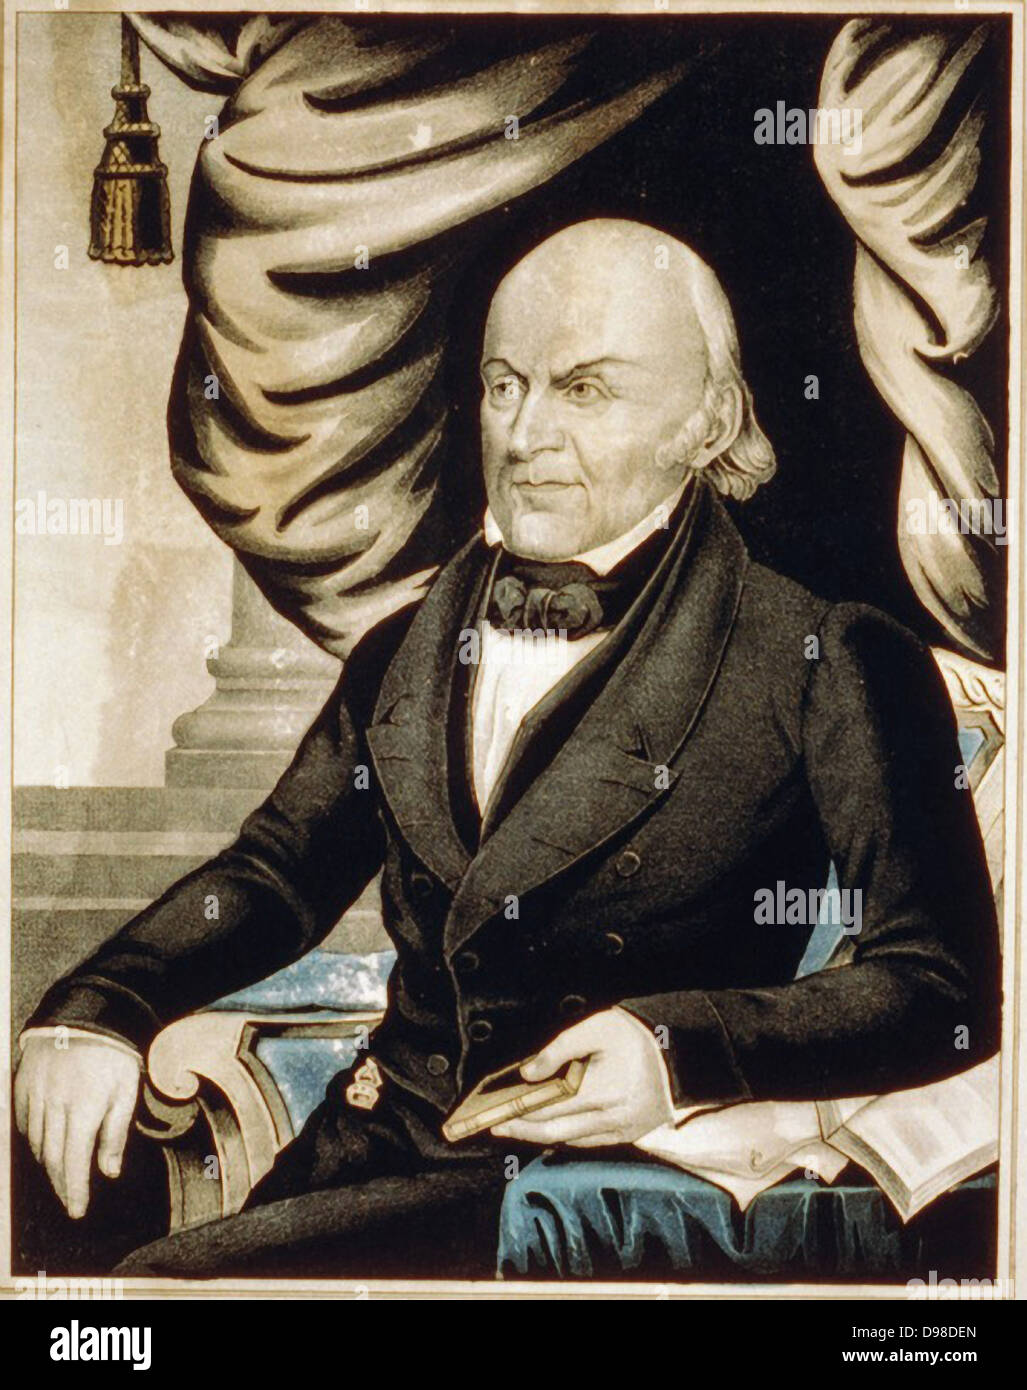 John Quincy Adams (1767-1848) American diplomat and Sixth President of the United States of America 1825-1829. Currier & Ives lithograph. Stock Photo